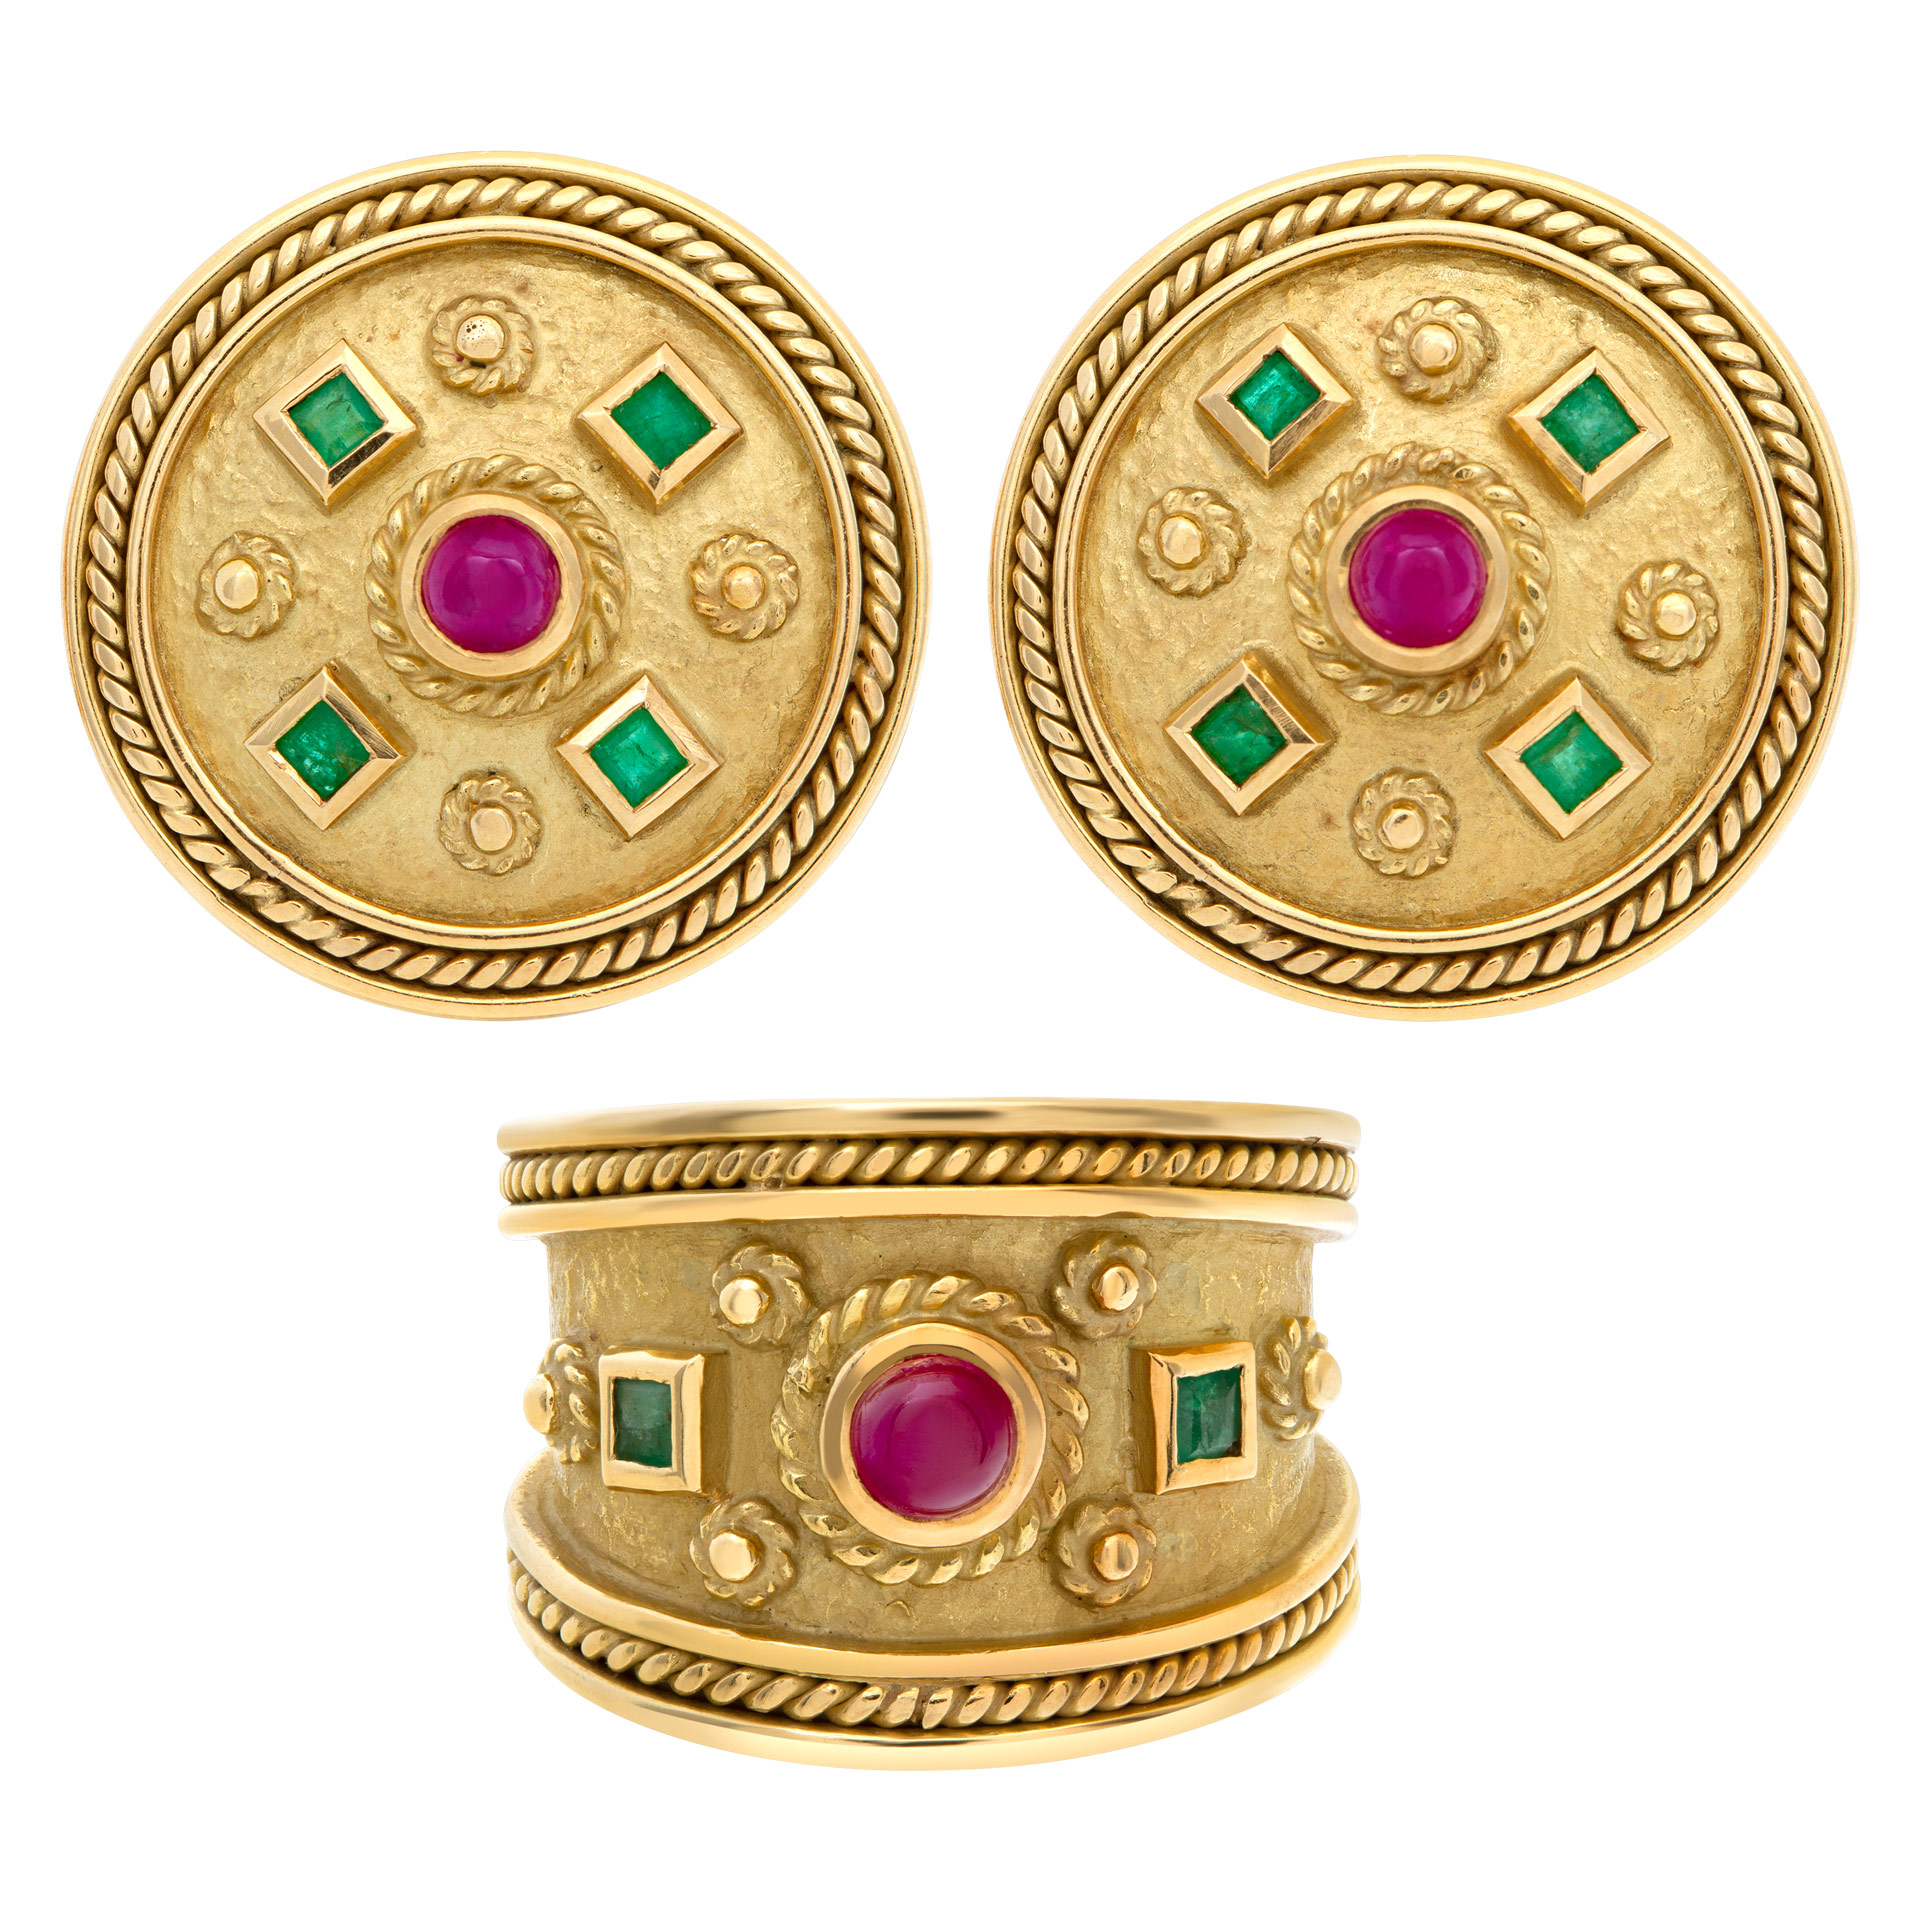 Azteca design earring & ring set in 18k yellow gold with cabachon rubies & square cut emeralds image 1